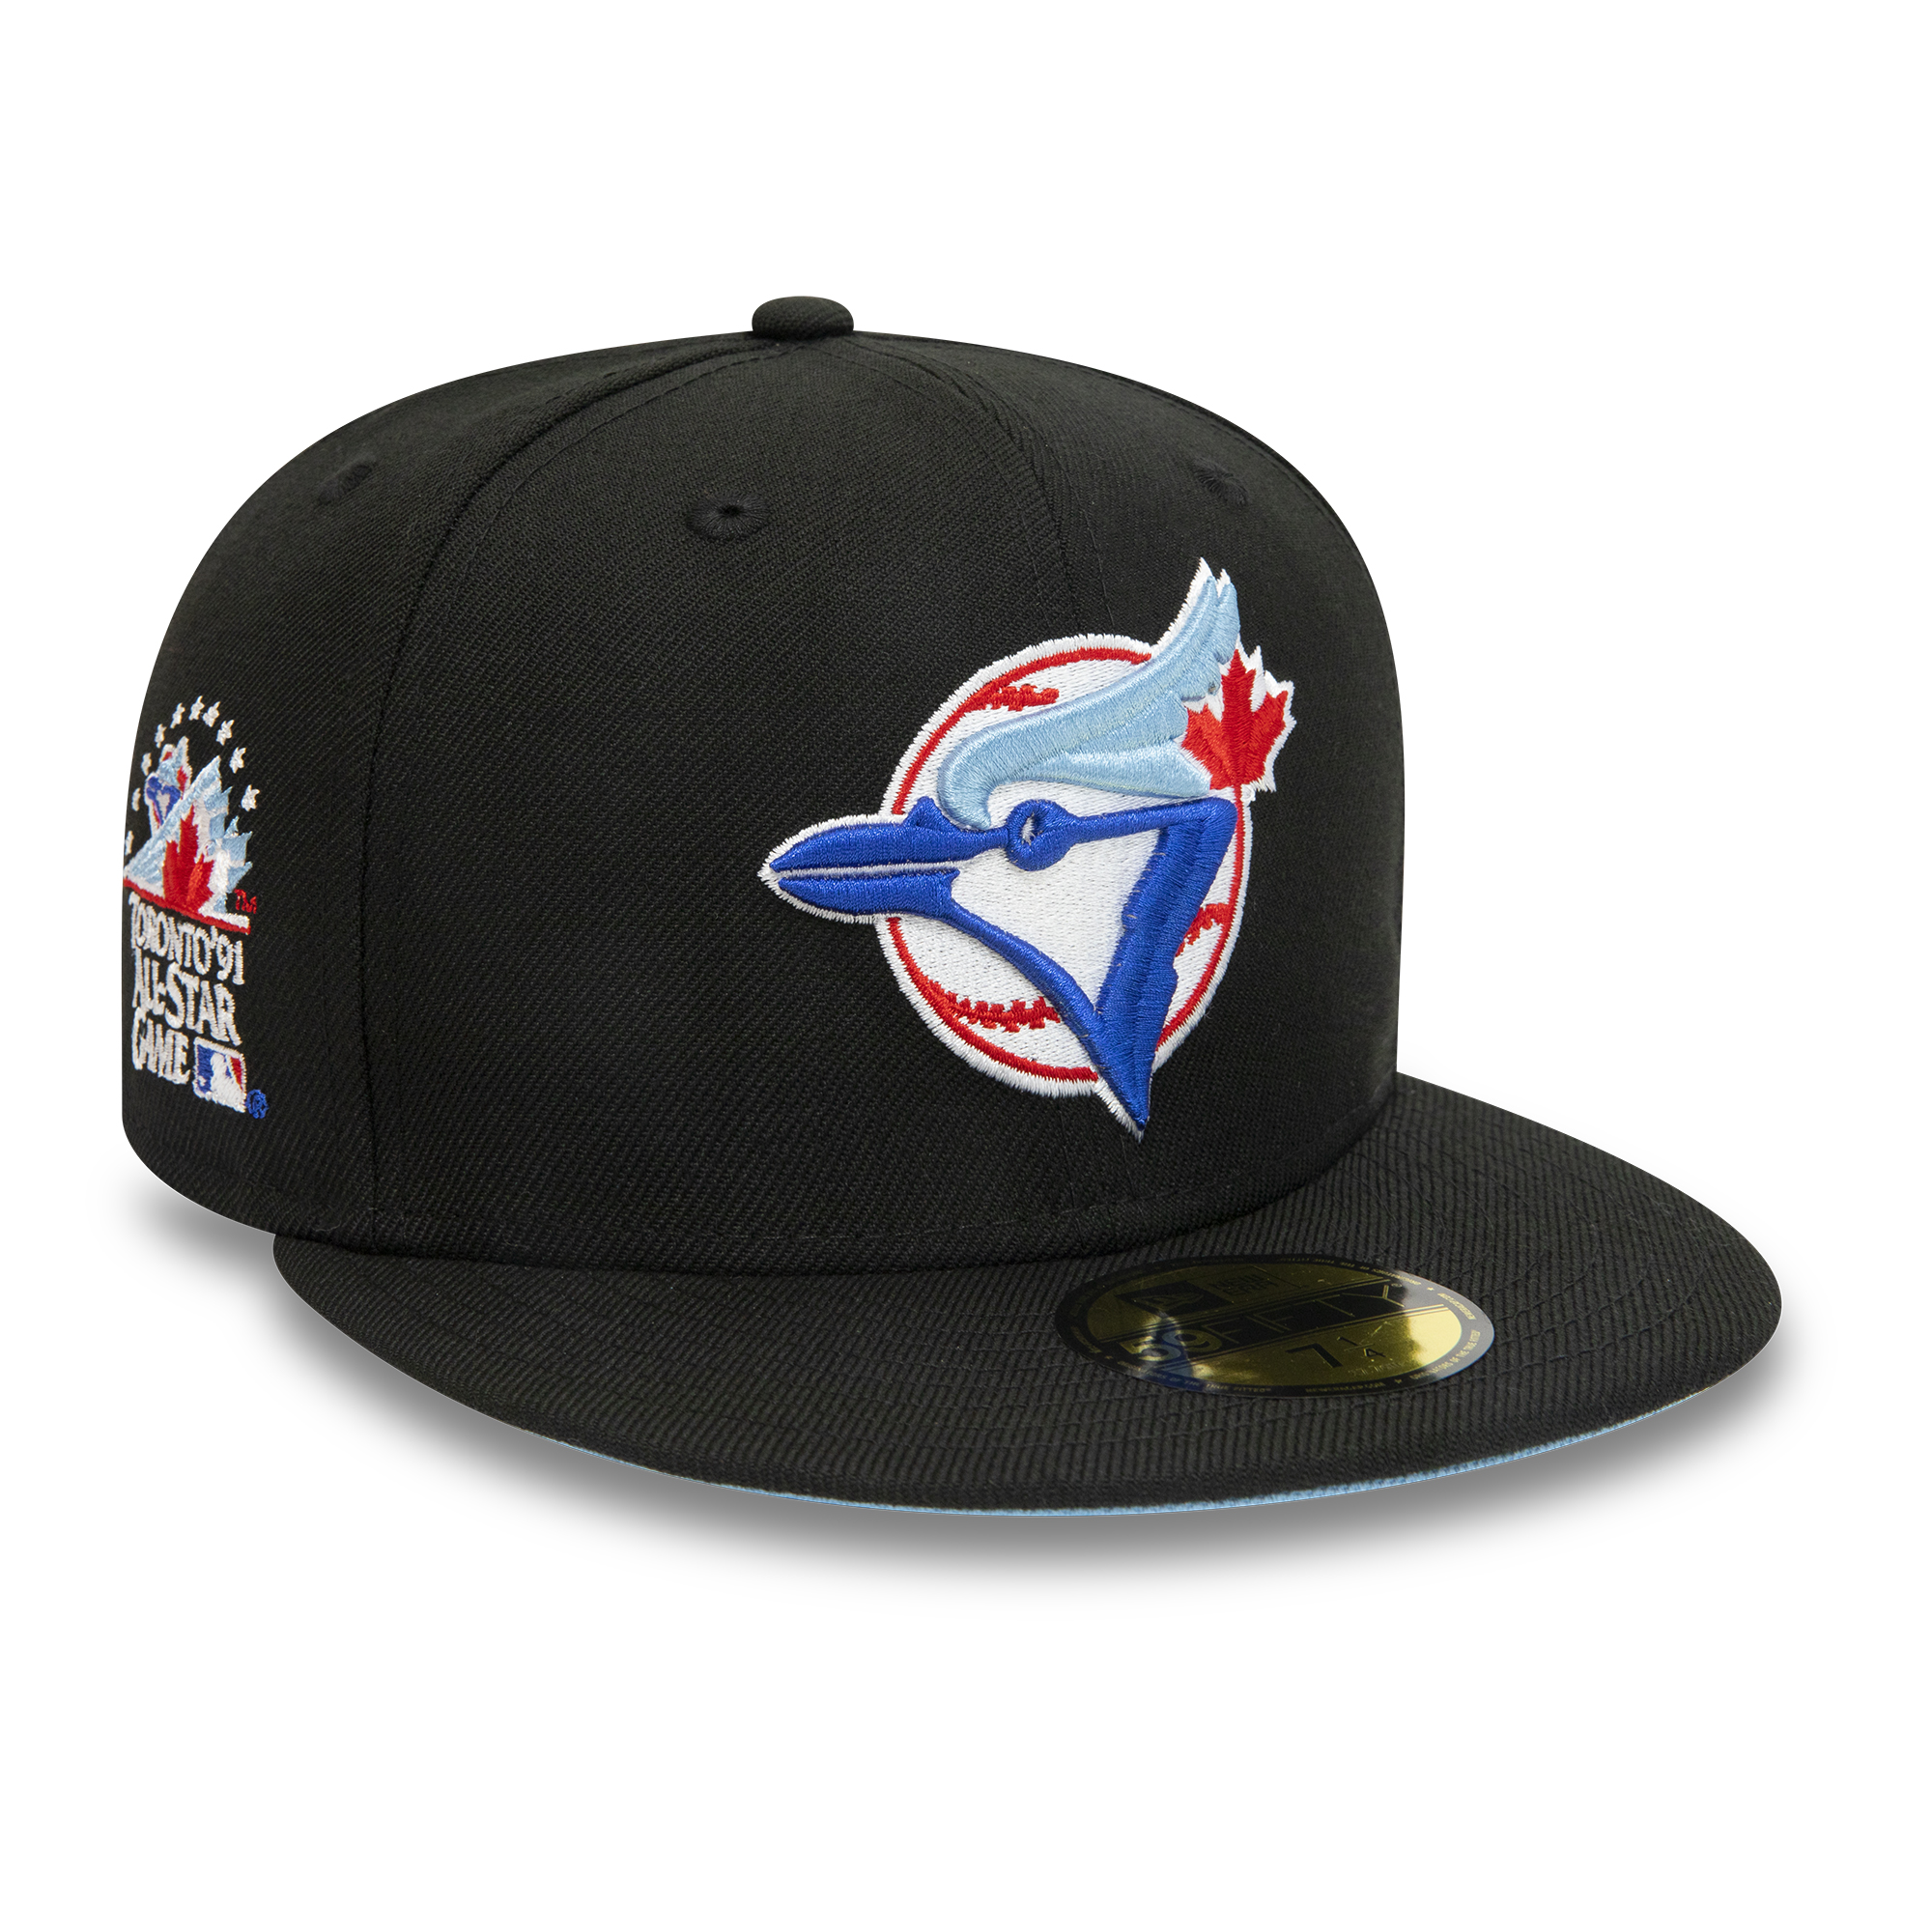 blue jays hat outfit